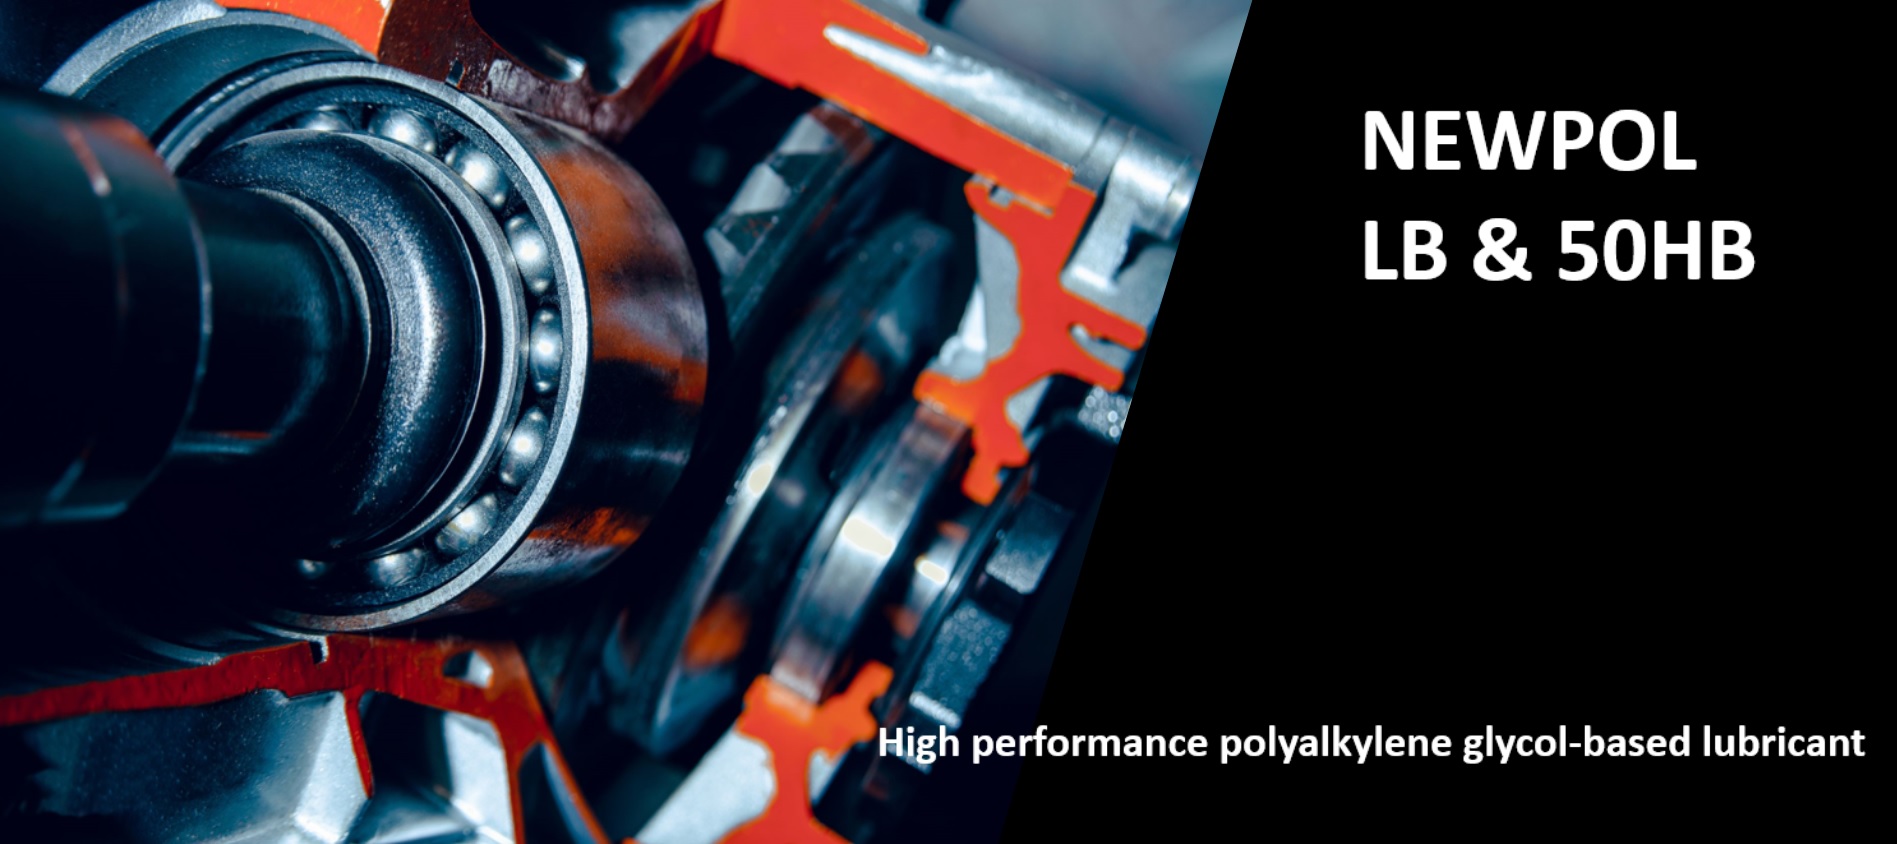 Polyalkylene glycol-based lubricant "NEWPOL LB, 50HB" page is now open.